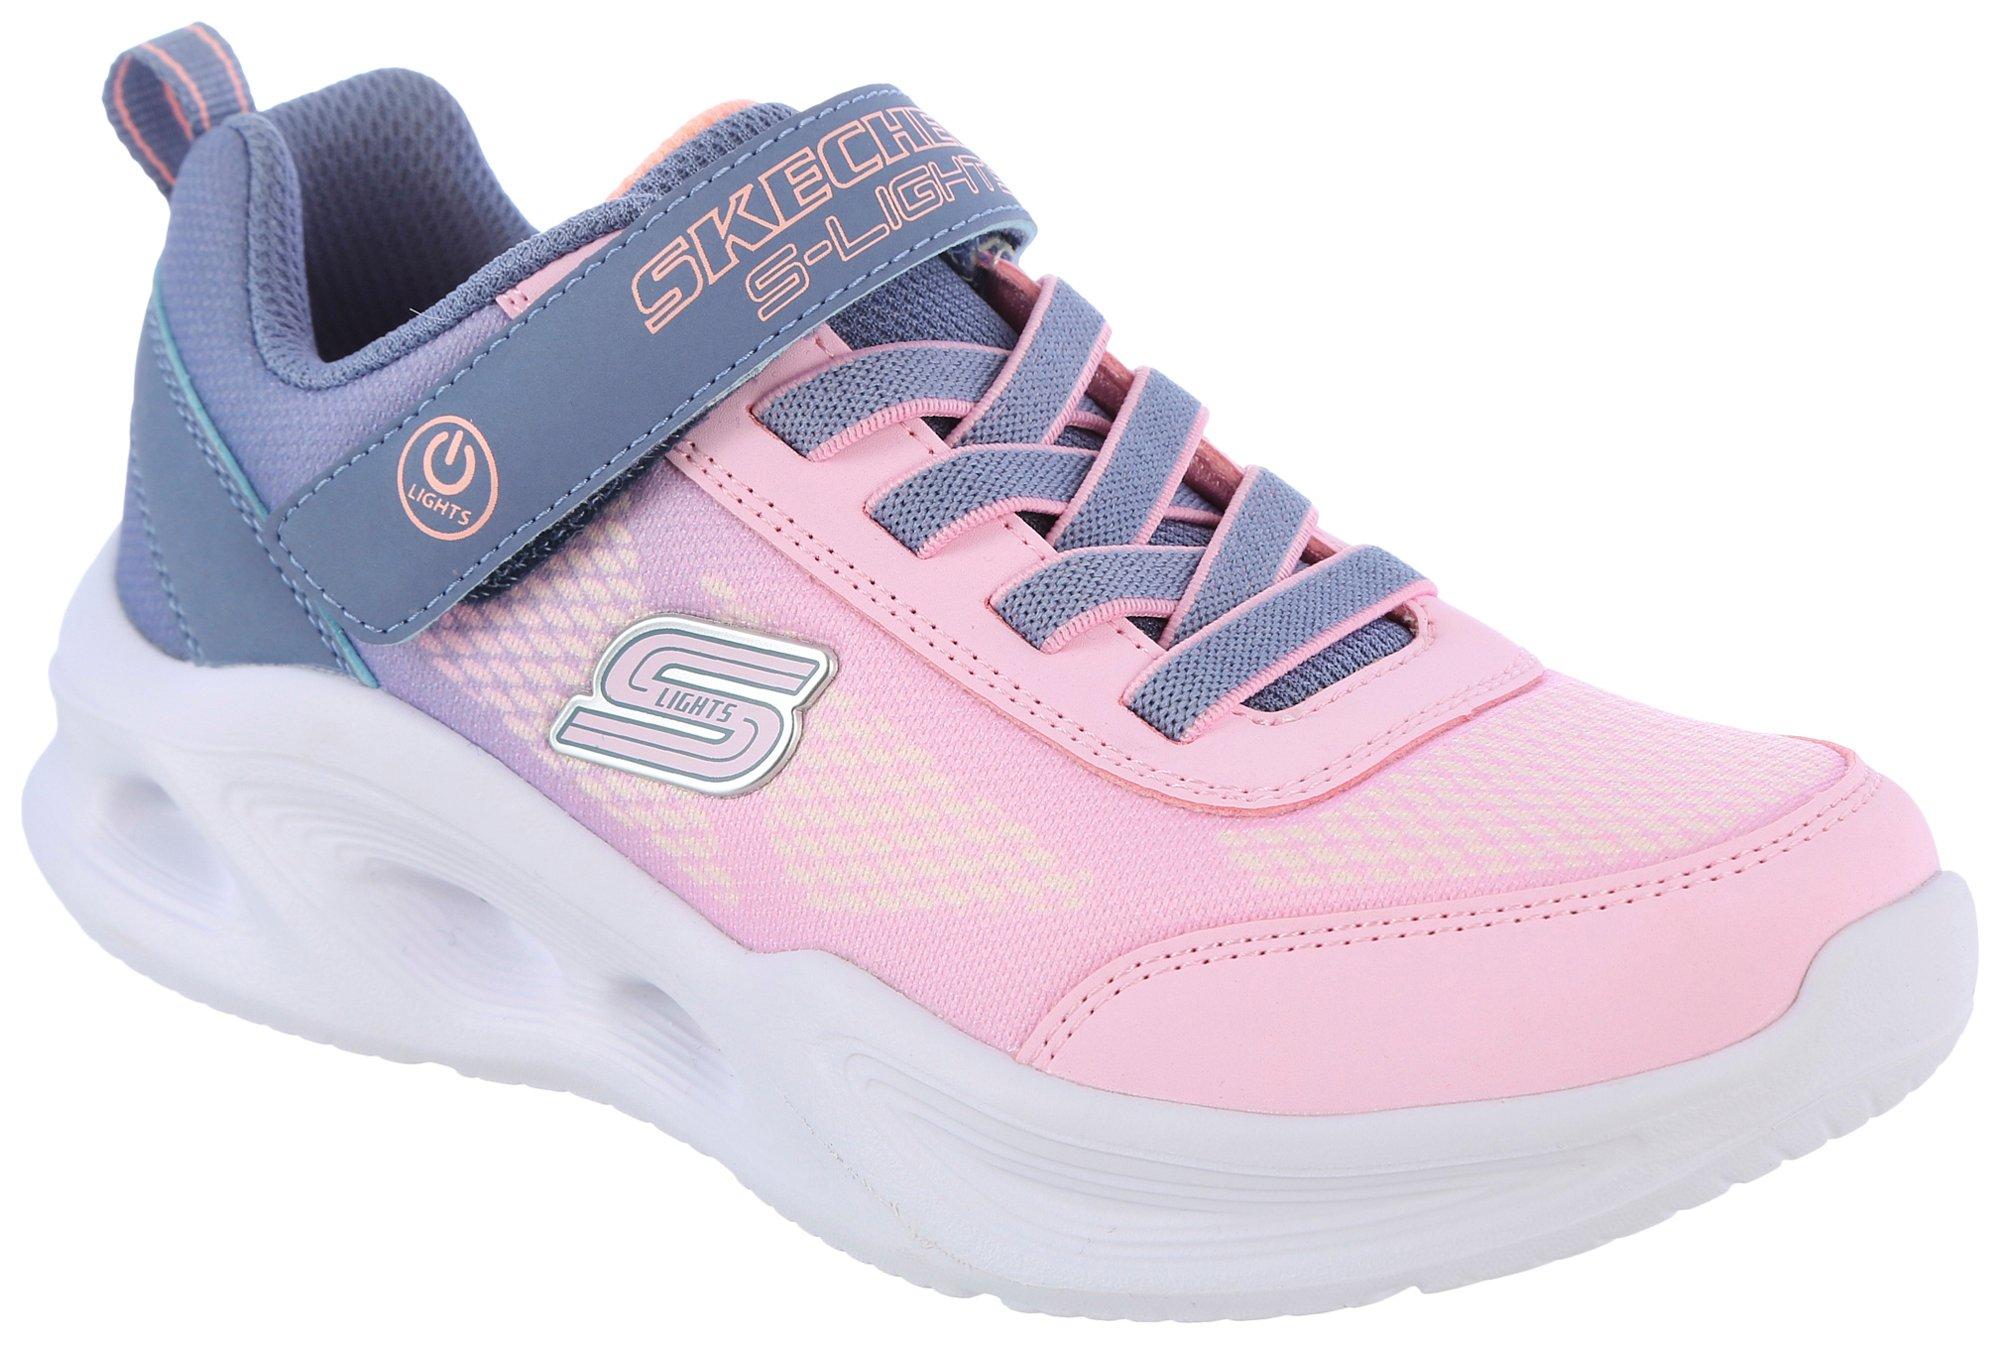 Girls Sola Glow Athletic Shoes